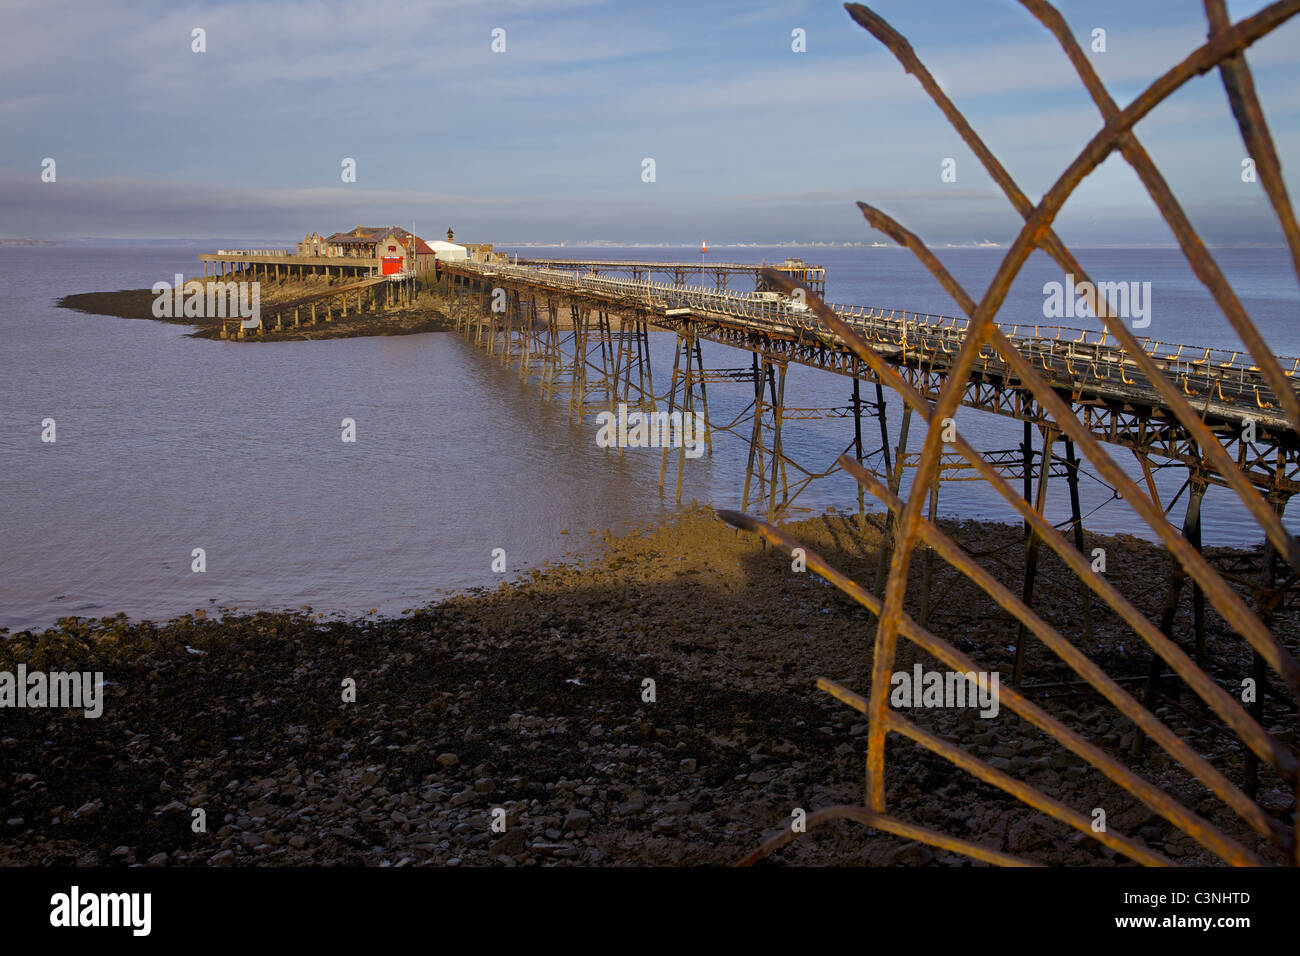 The old derelict pier and life boat station in Weston Super Mare Somerset, England Stock Photo